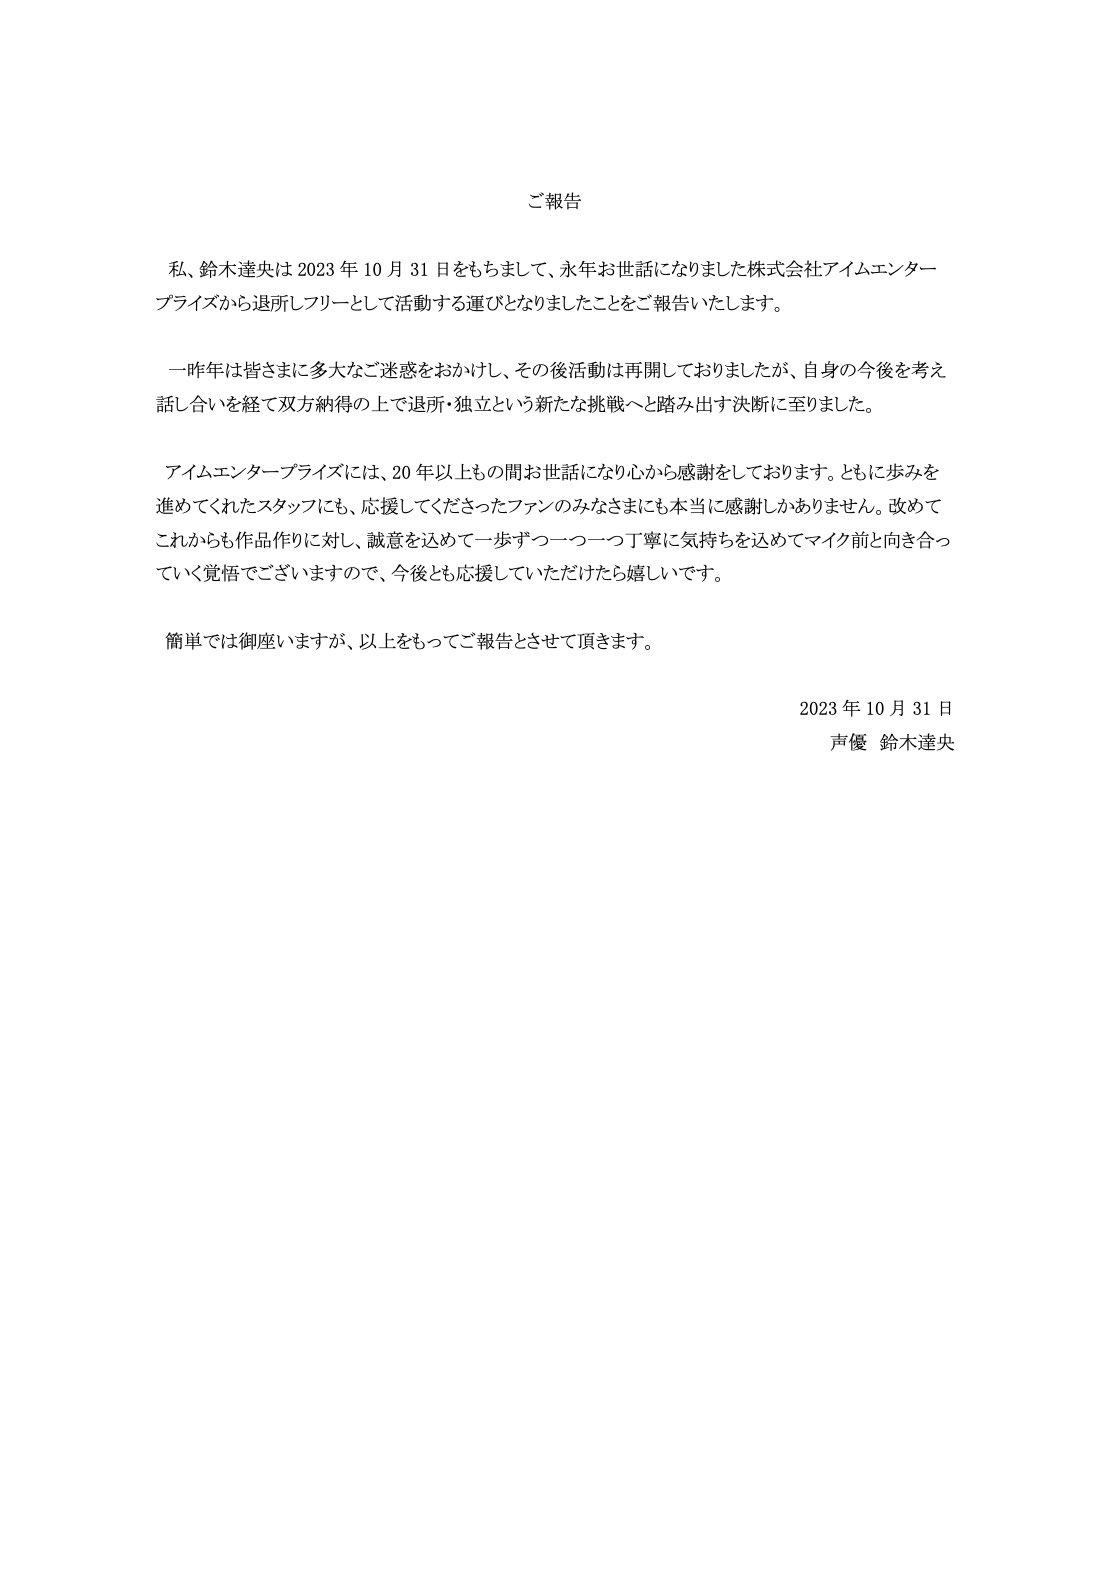 Tatsuhisa Suzuki Posts His Departure from Agency on Official X Account